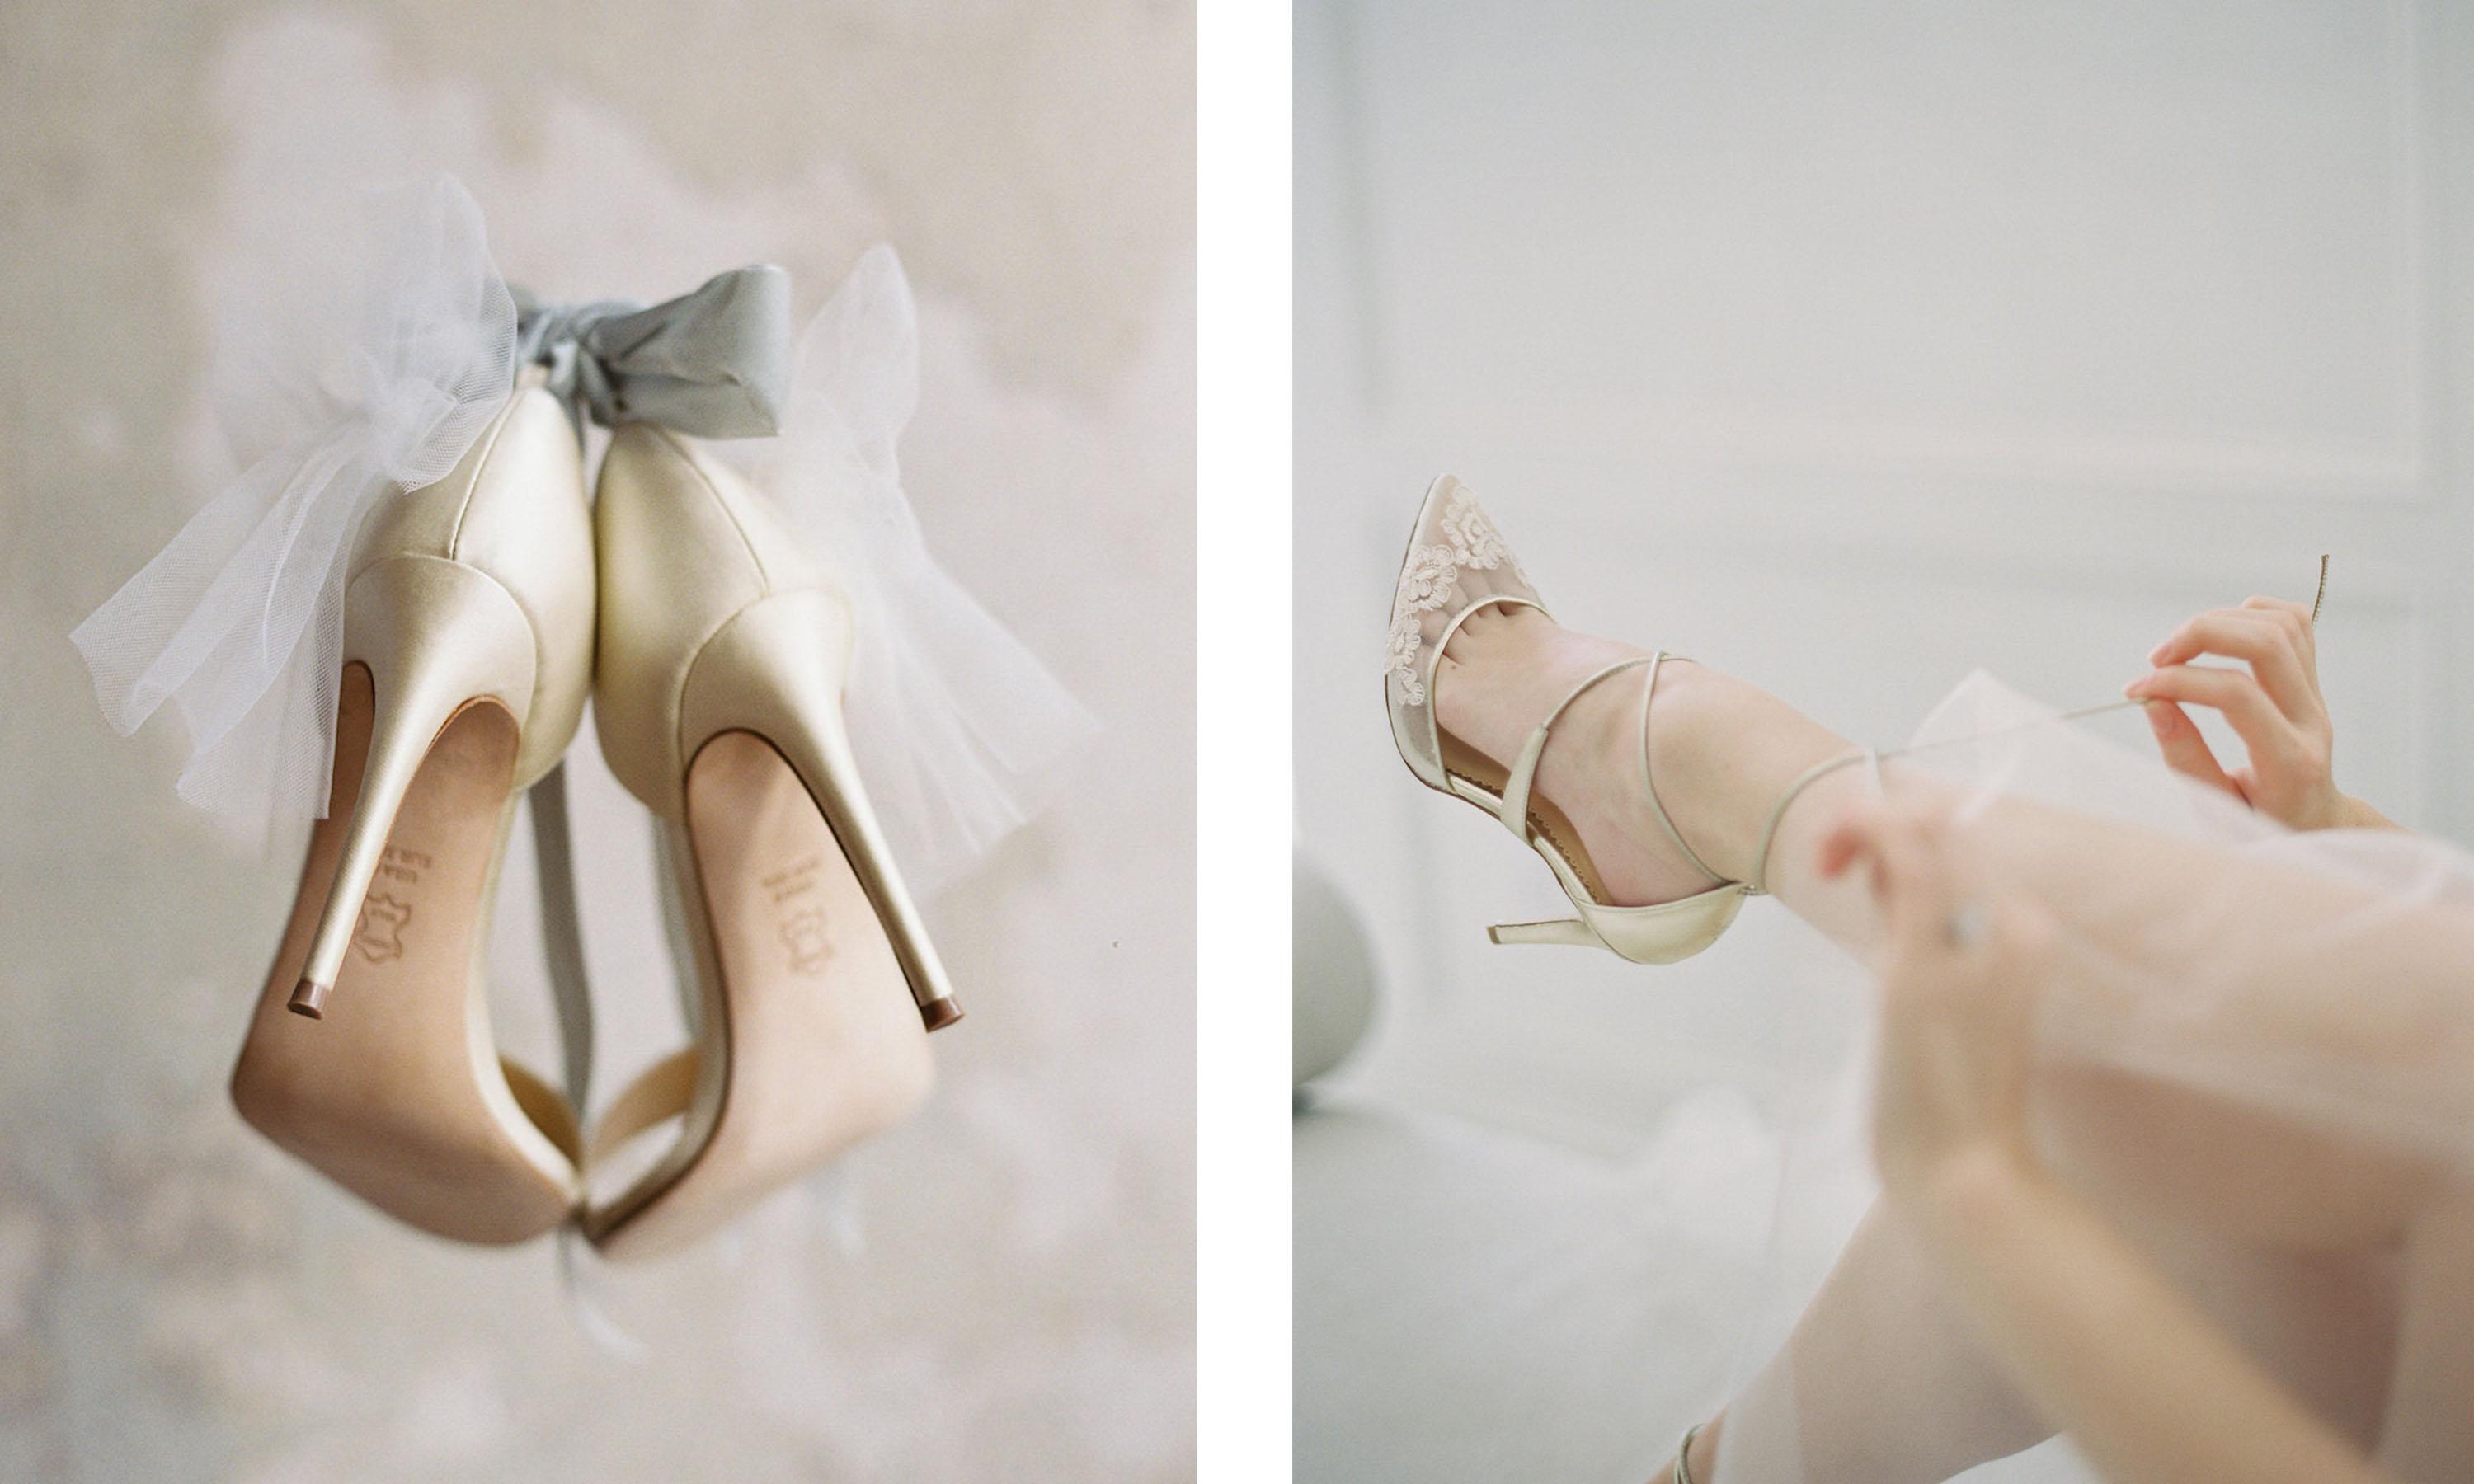 The Perfect Christian Louboutin Shoes For Brides & Grooms - World